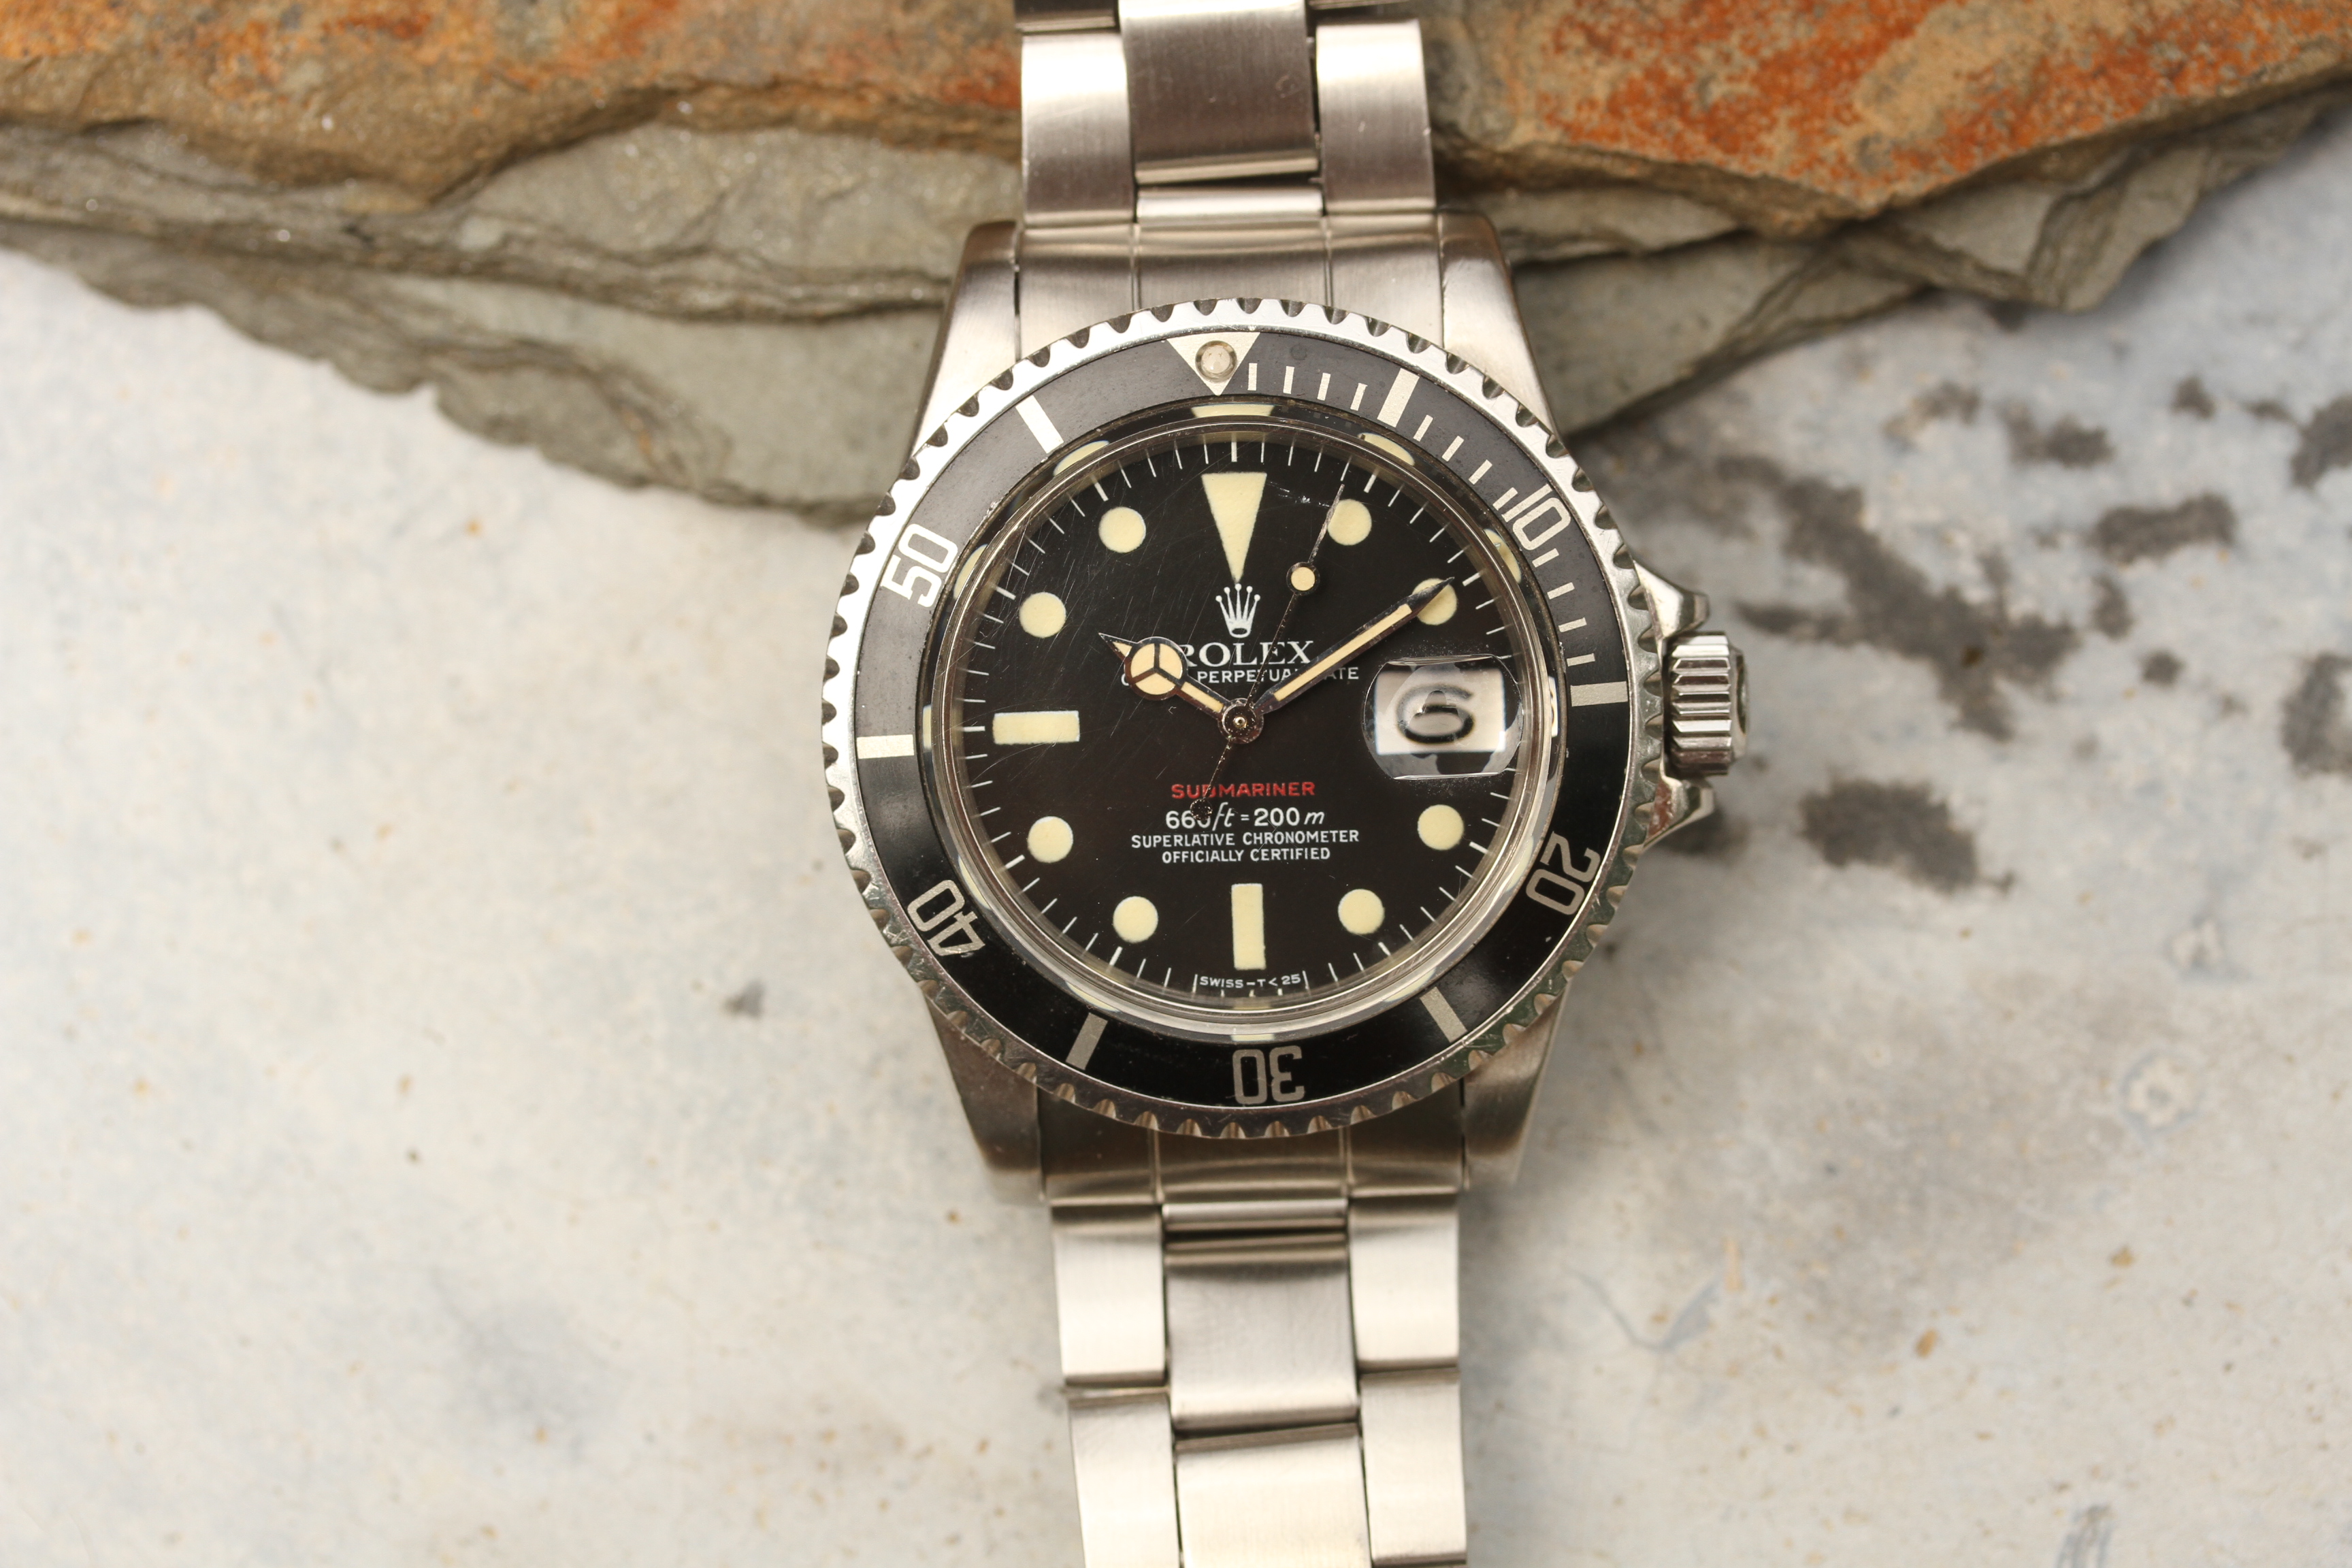 1973 Submariner ref. 1680 "MK6 with Papers, Cream Patina" - Lunar Oyster - Buying and Selling